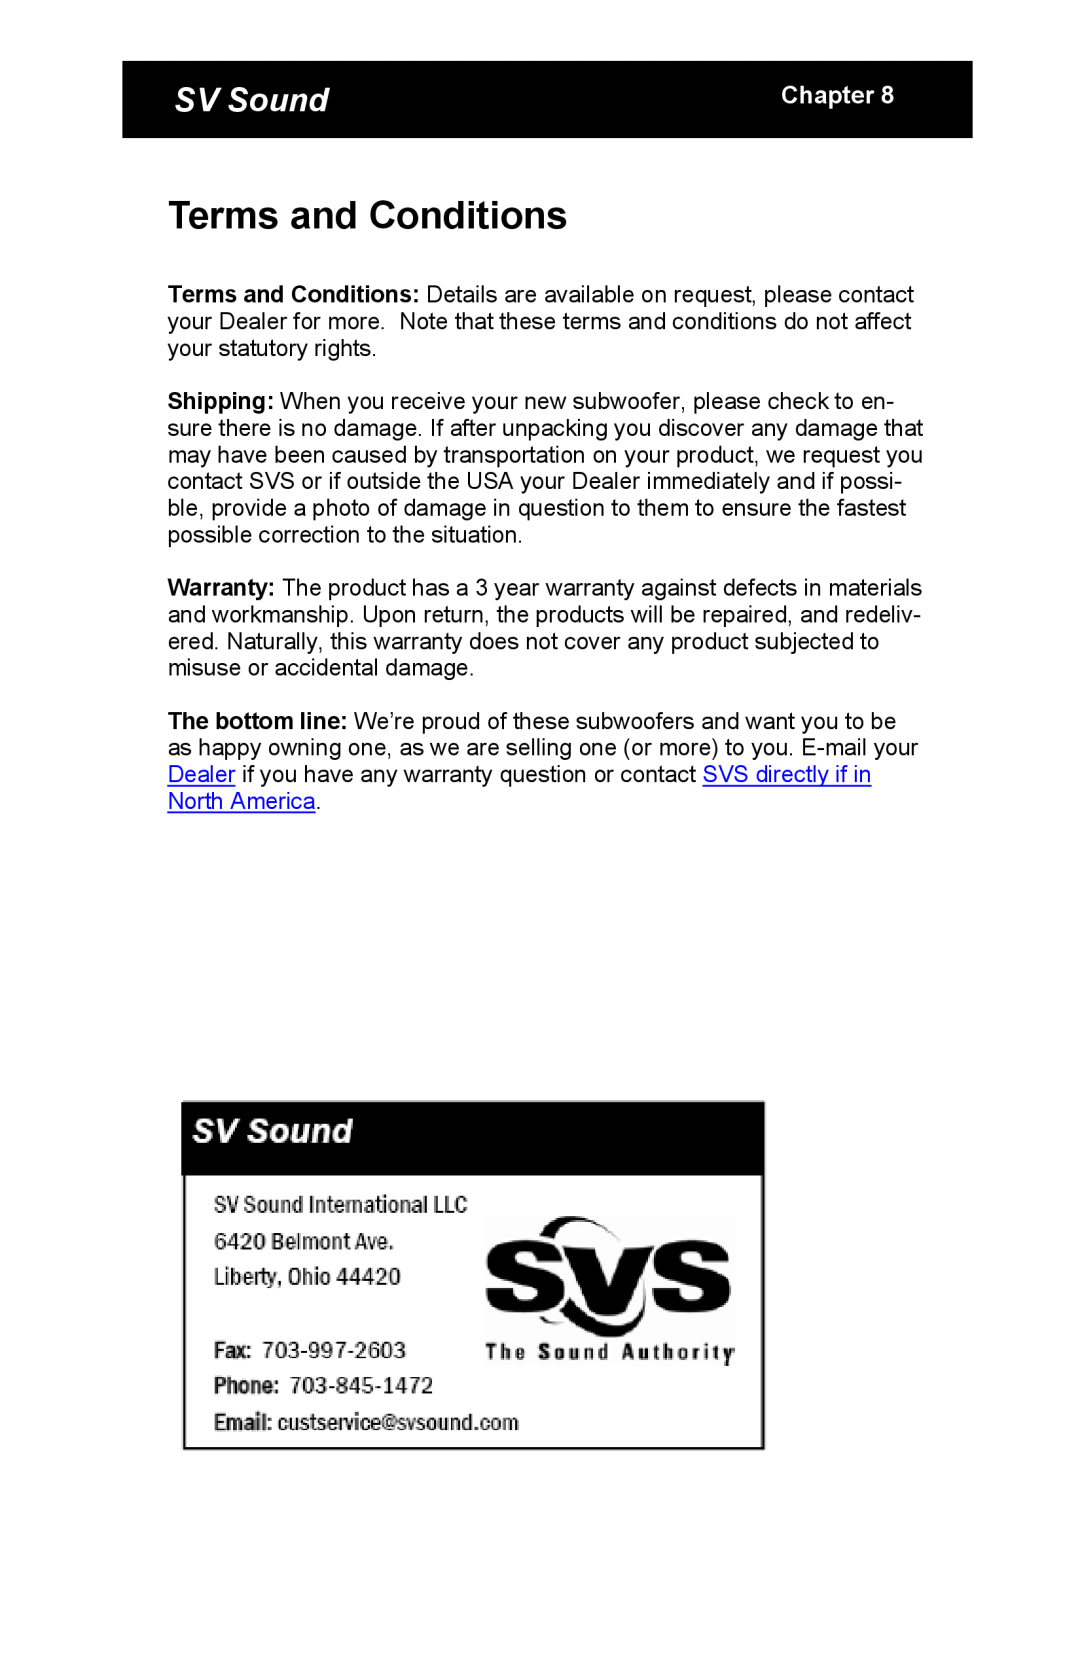 SV Sound PB10-NSD specifications Terms and Conditions, SV Sound, Chapter 